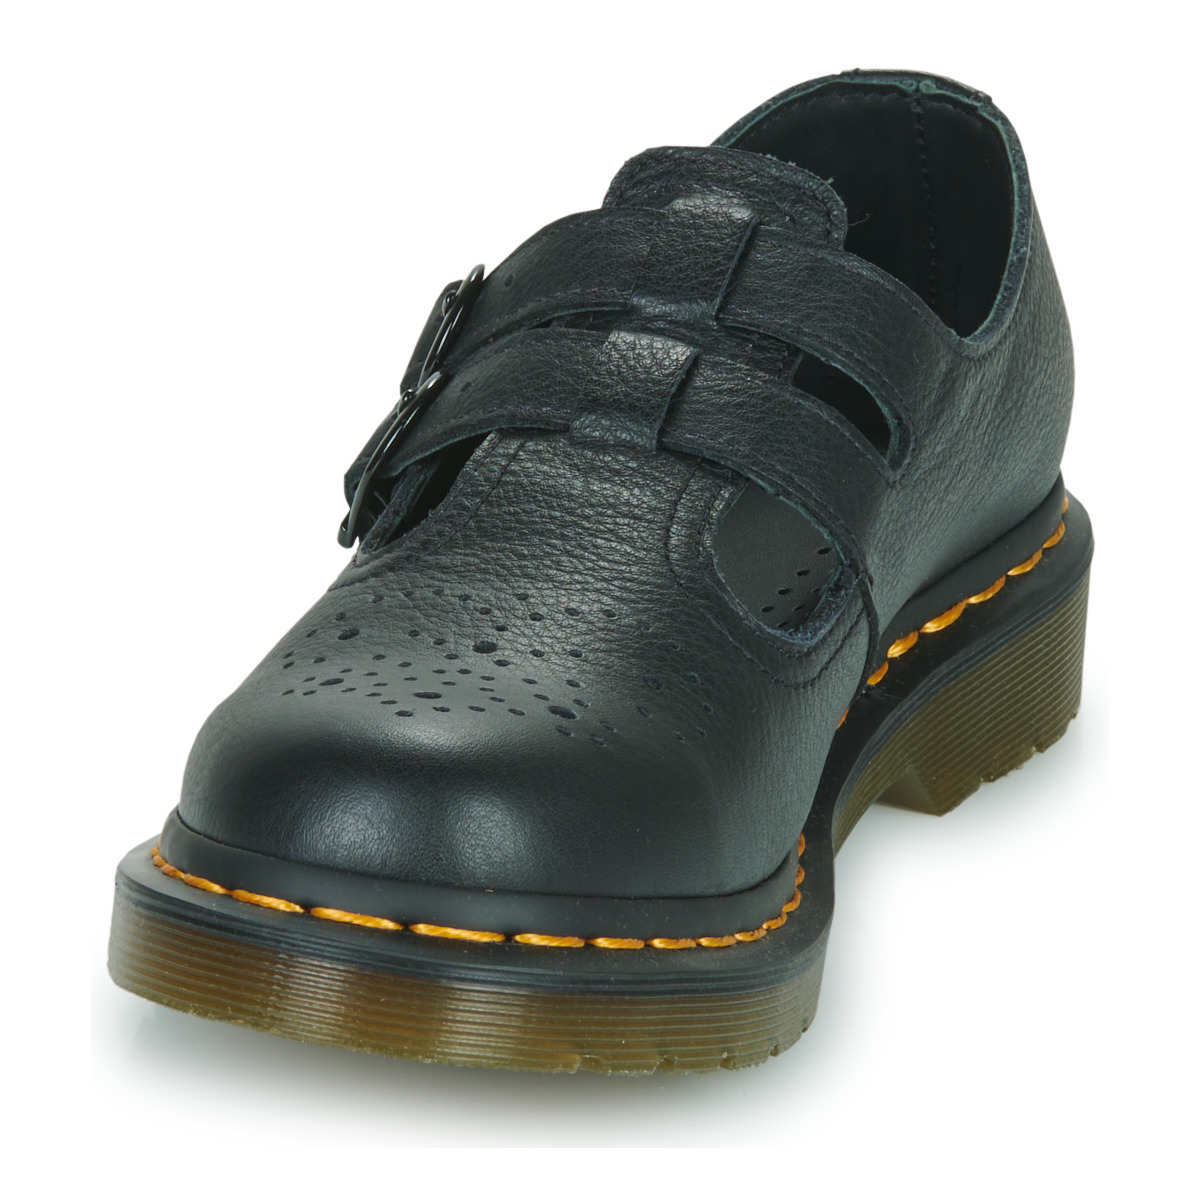 Dr. Martens Noir 8065 Mary Jane DYHc0Idy